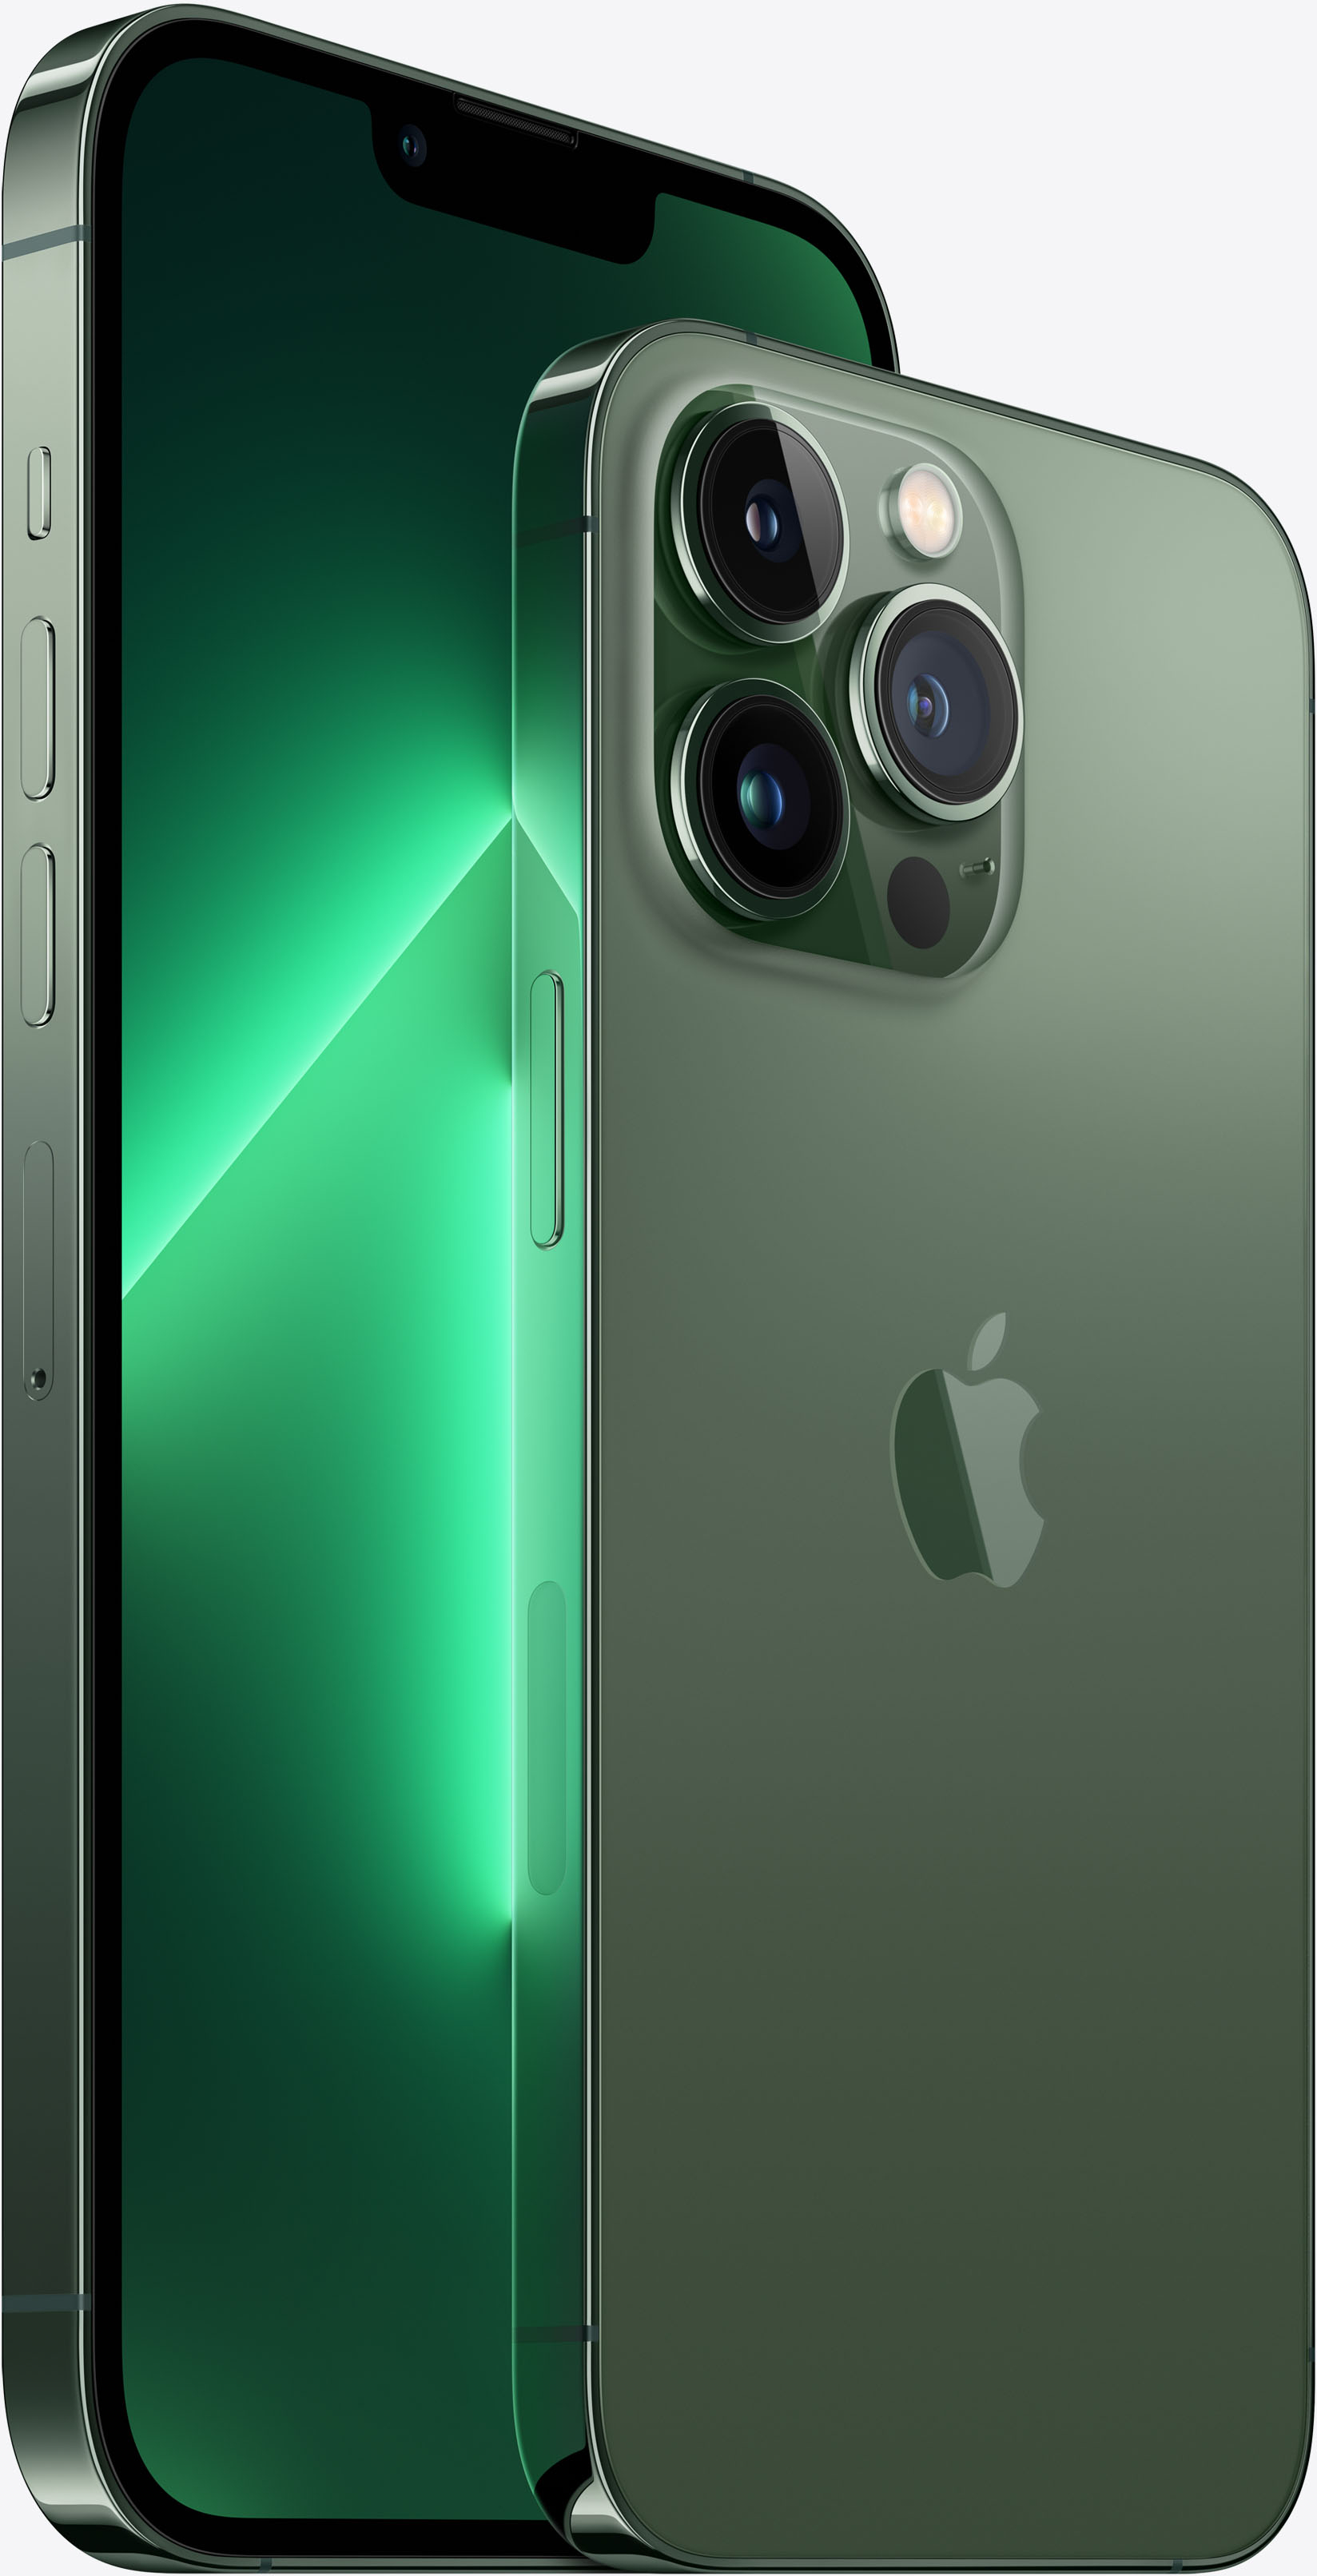 questions-and-answers-apple-iphone-13-pro-max-5g-256gb-alpine-green